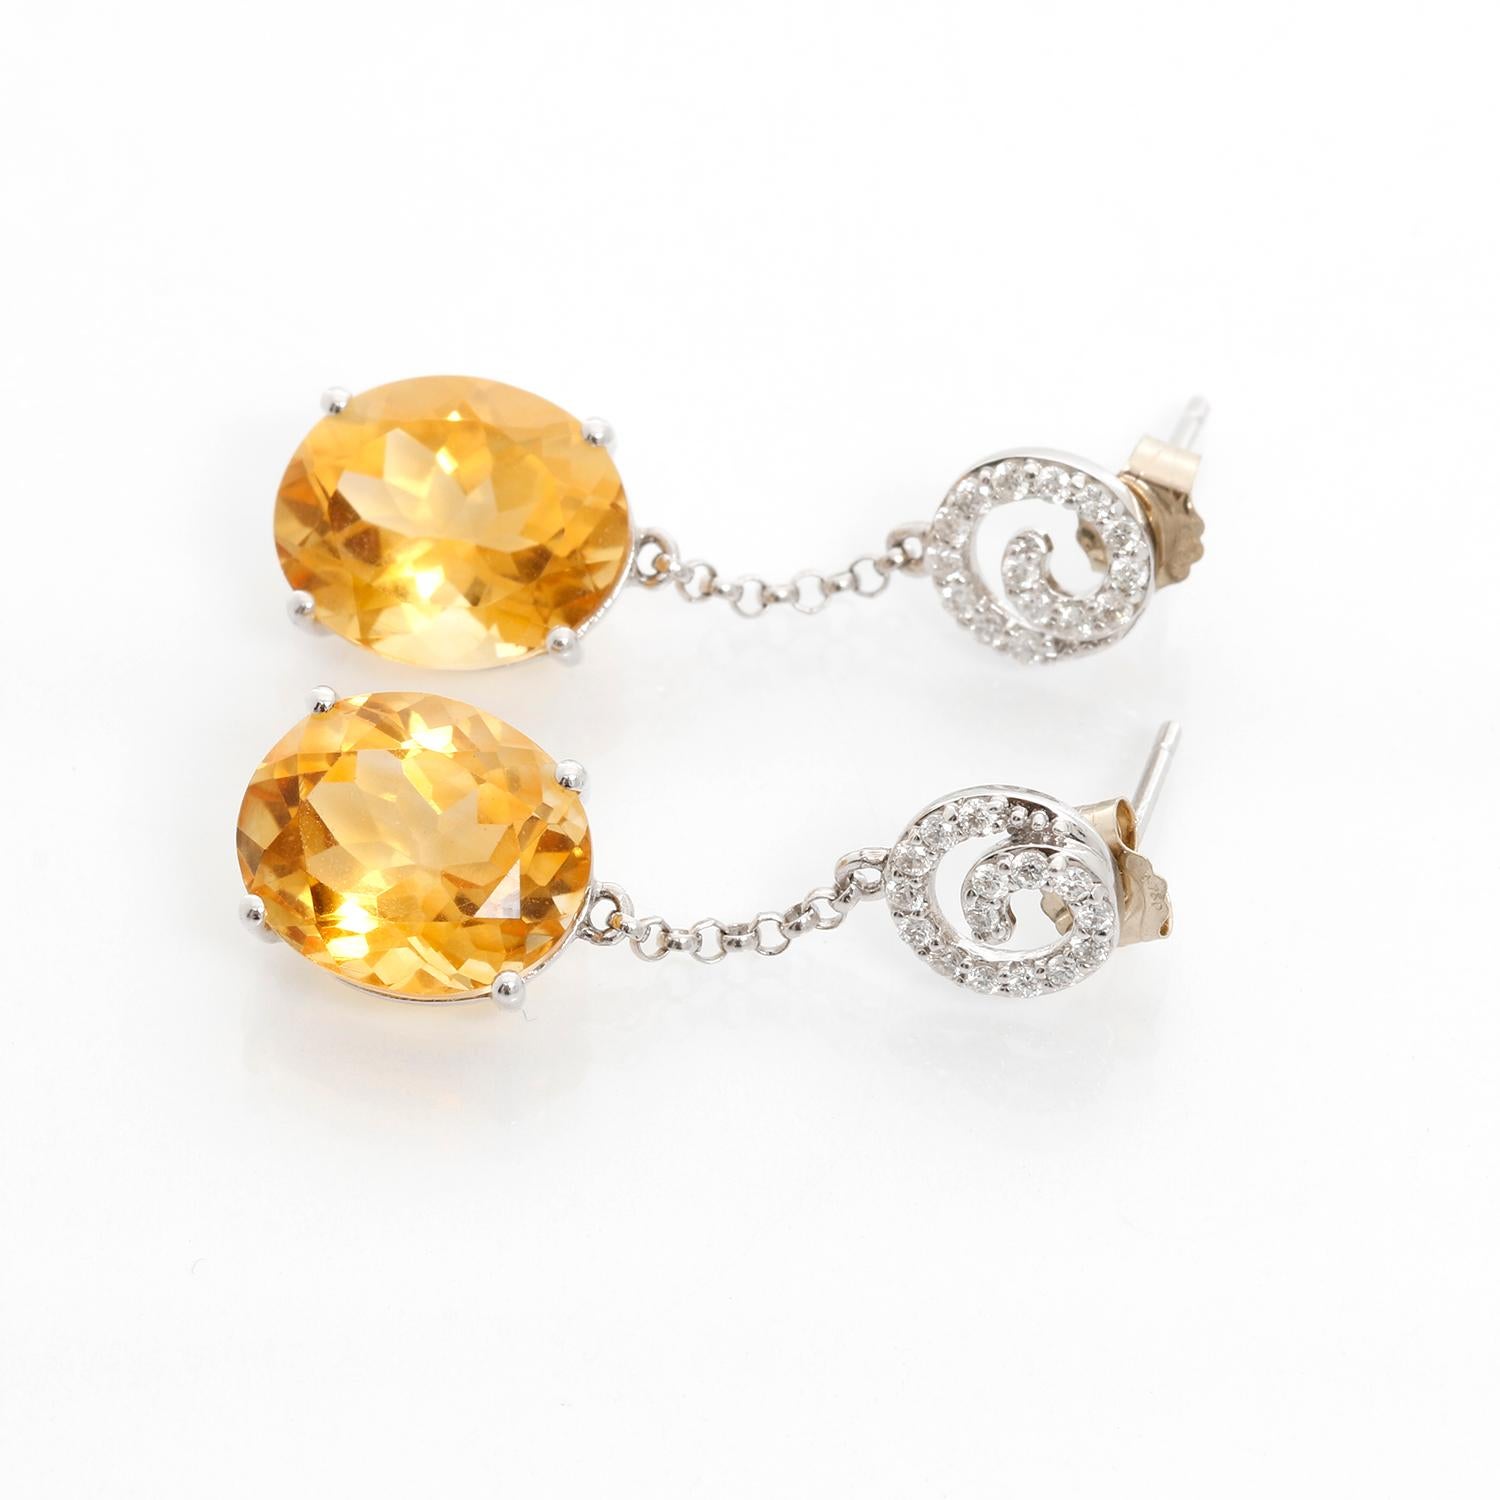 18K White Gold Diamond and Citrine Dangle Earrings  - Beautiful Citrine stones weighing approx. 3 cts. set on 18K White gold dangling from a spiral diamond set. Total weight 4.6 grams. Total length 1 inch.